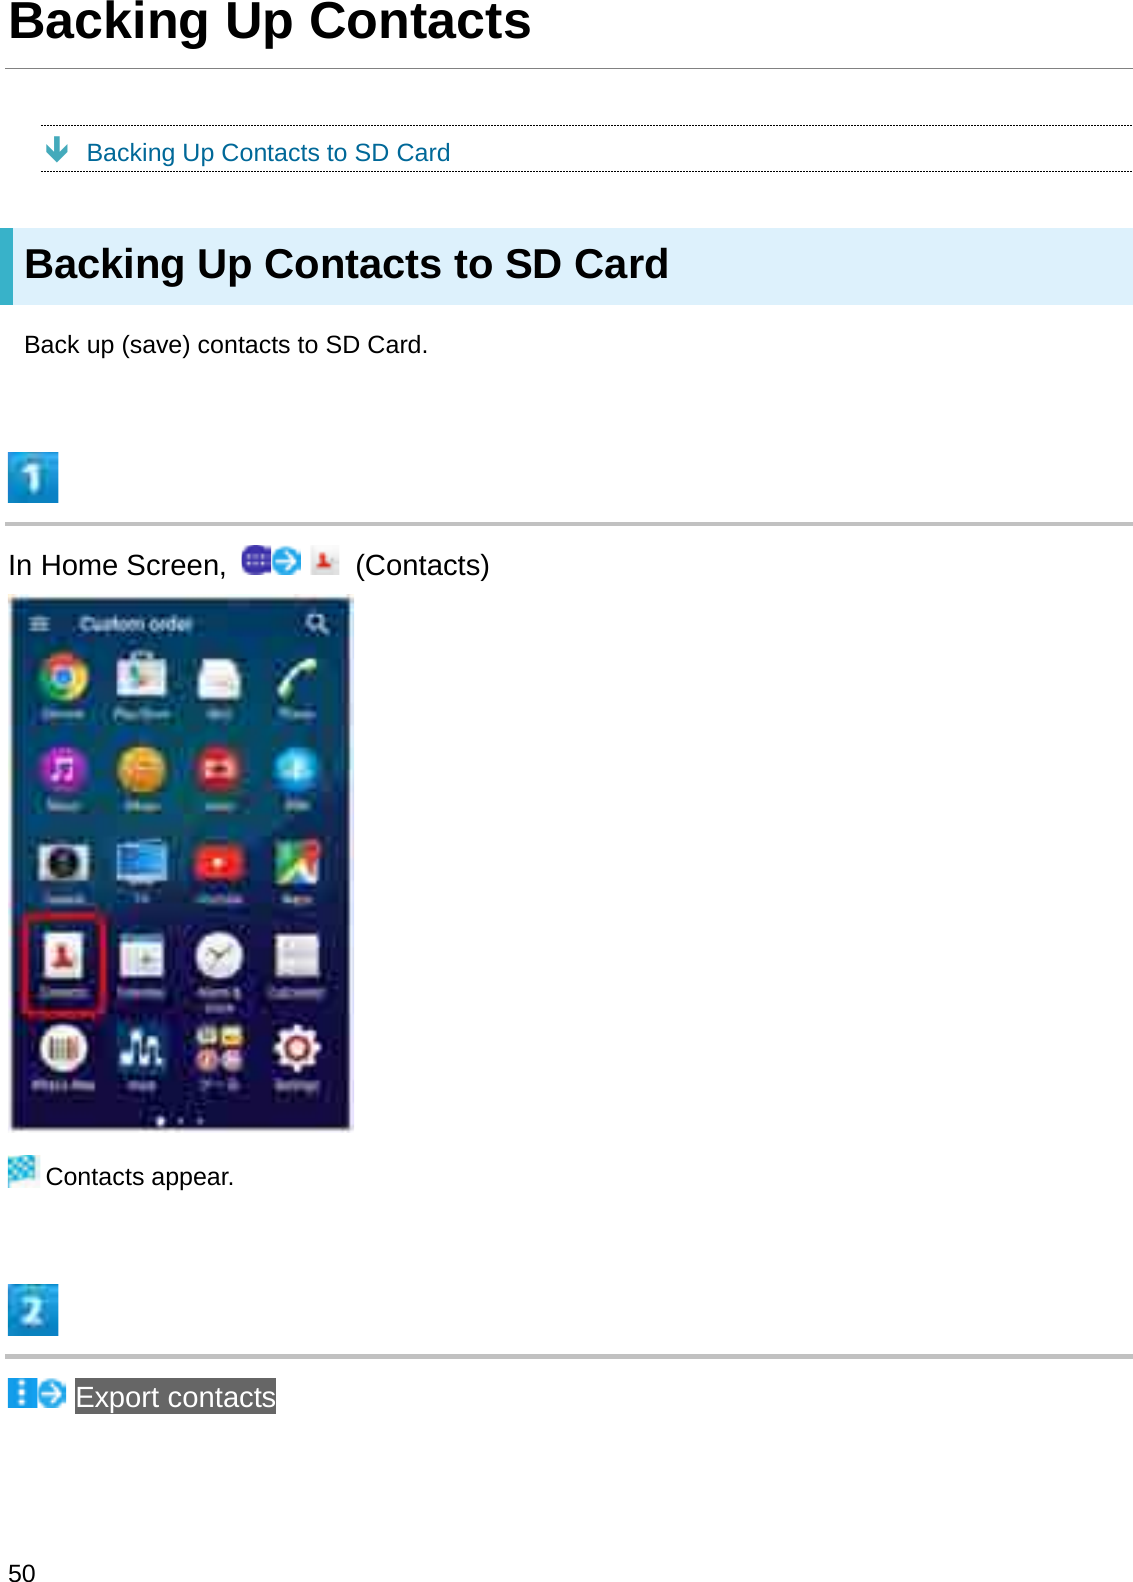 Backing Up ContactsÐBacking Up Contacts to SD CardBacking Up Contacts to SD CardBack up (save) contacts to SD Card.In Home Screen,  (Contacts)Contacts appear.Export contacts50